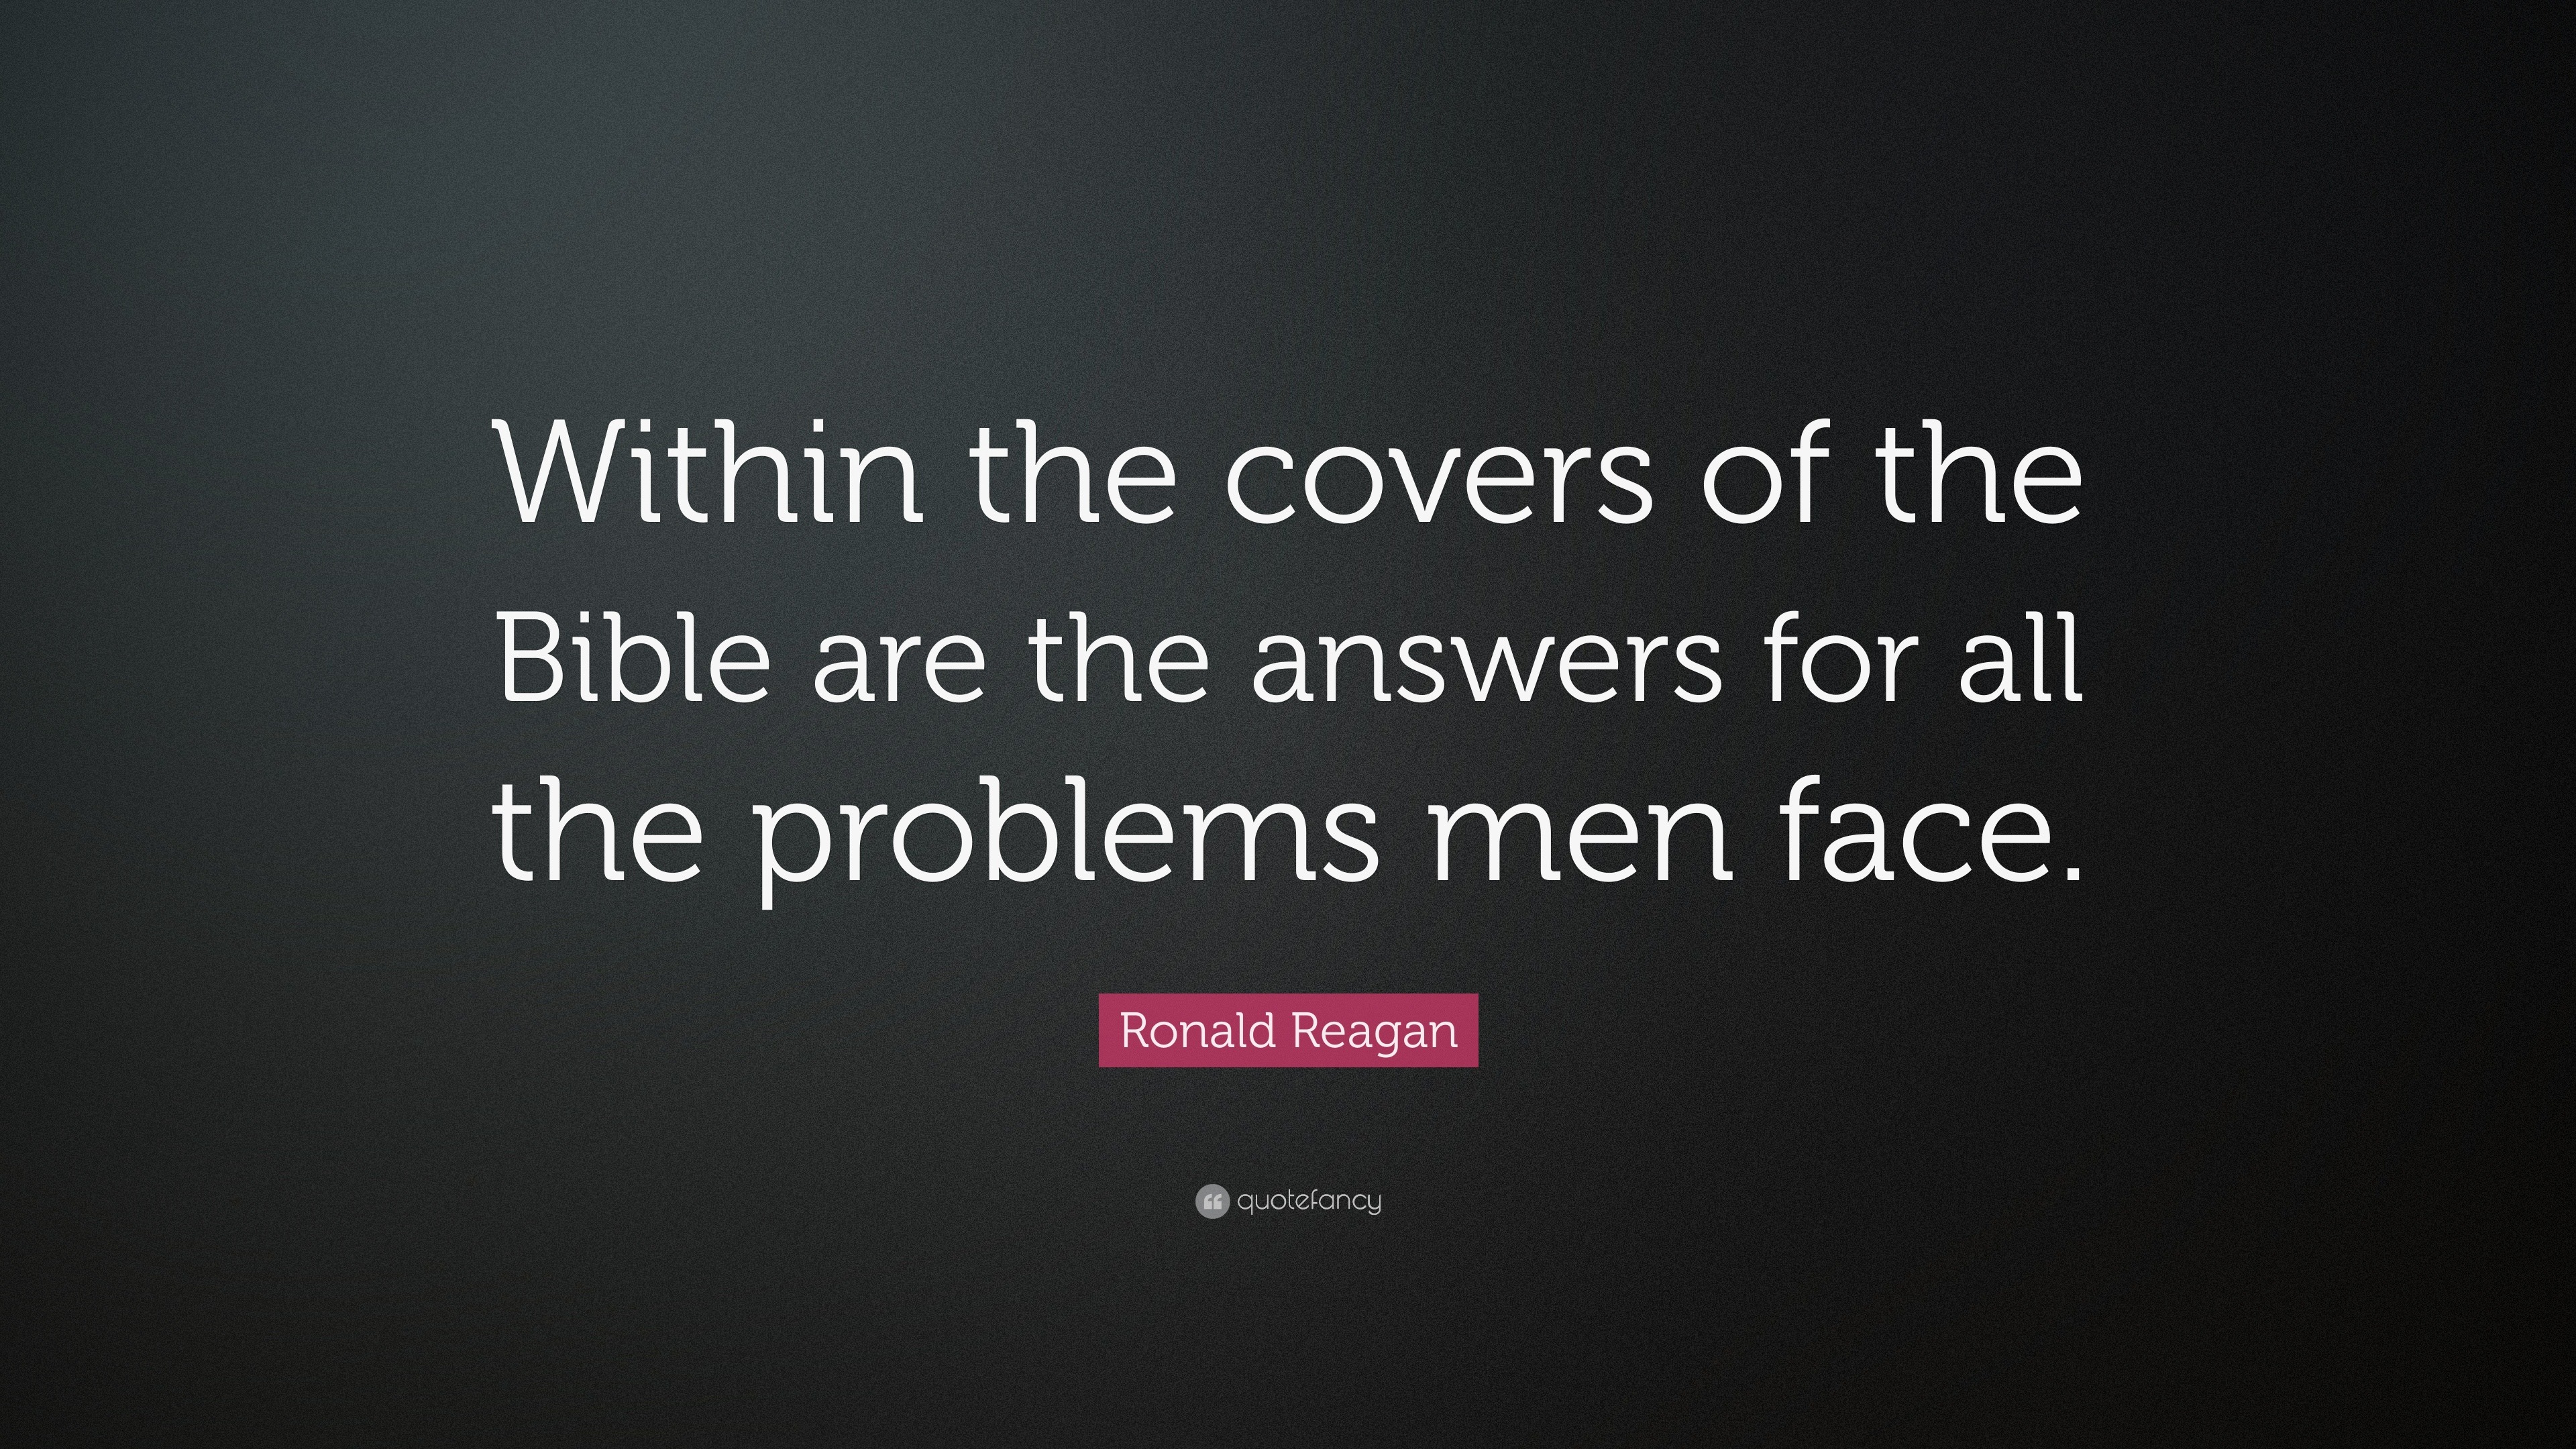 Ronald Reagan Quote: “Within the covers of the Bible are the answers